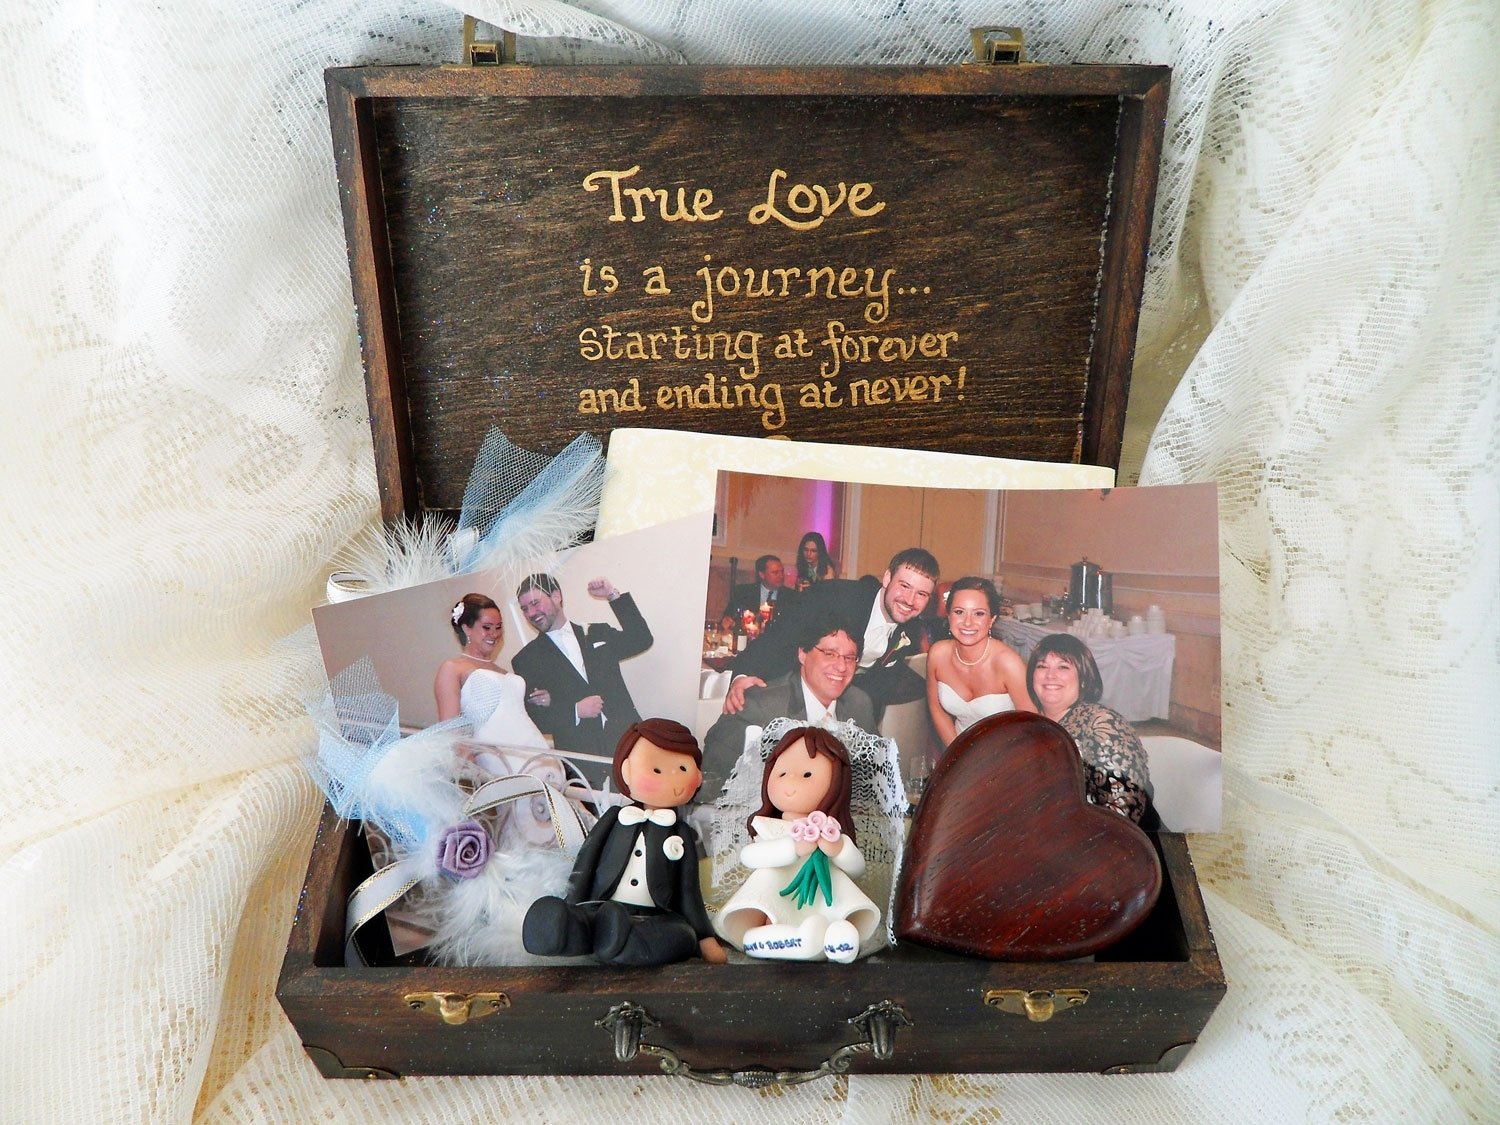 10 Most Recommended Christmas Gift Ideas For Newlyweds a perfect wedding gift design a beautiful memory box 2022